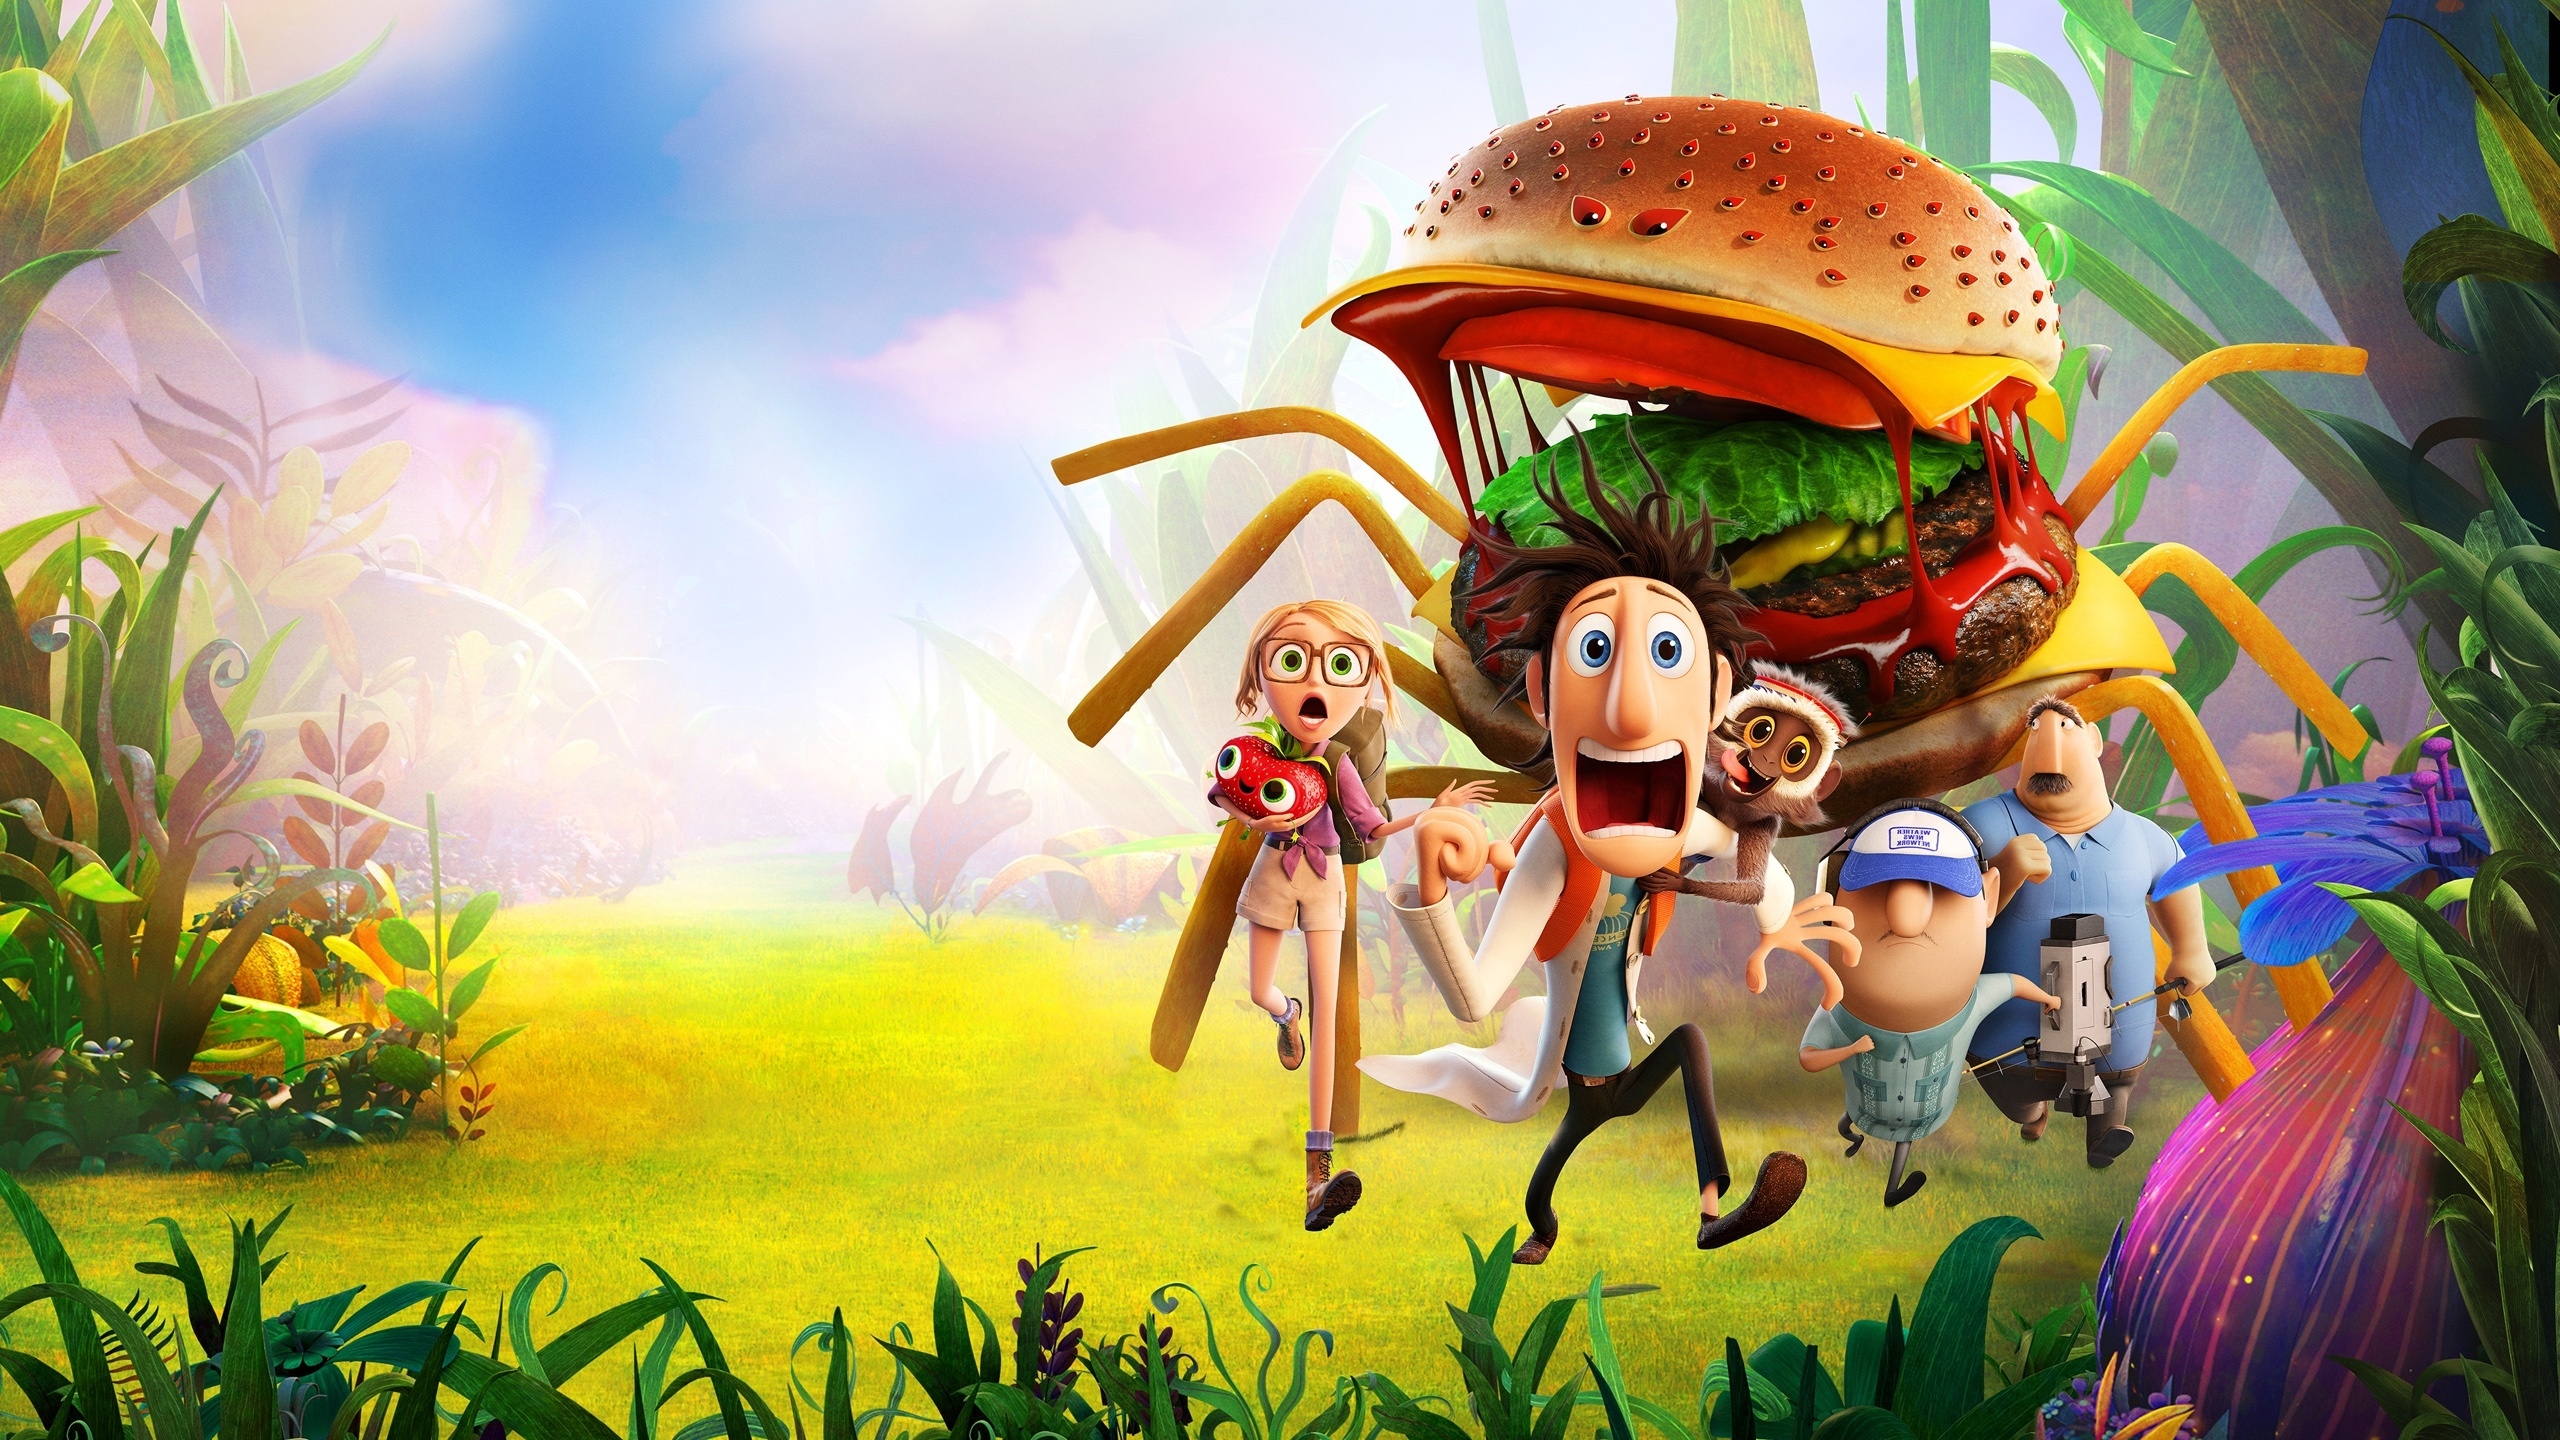 Cloudy with a chance of Meatballs for 2560x1440 HDTV resolution